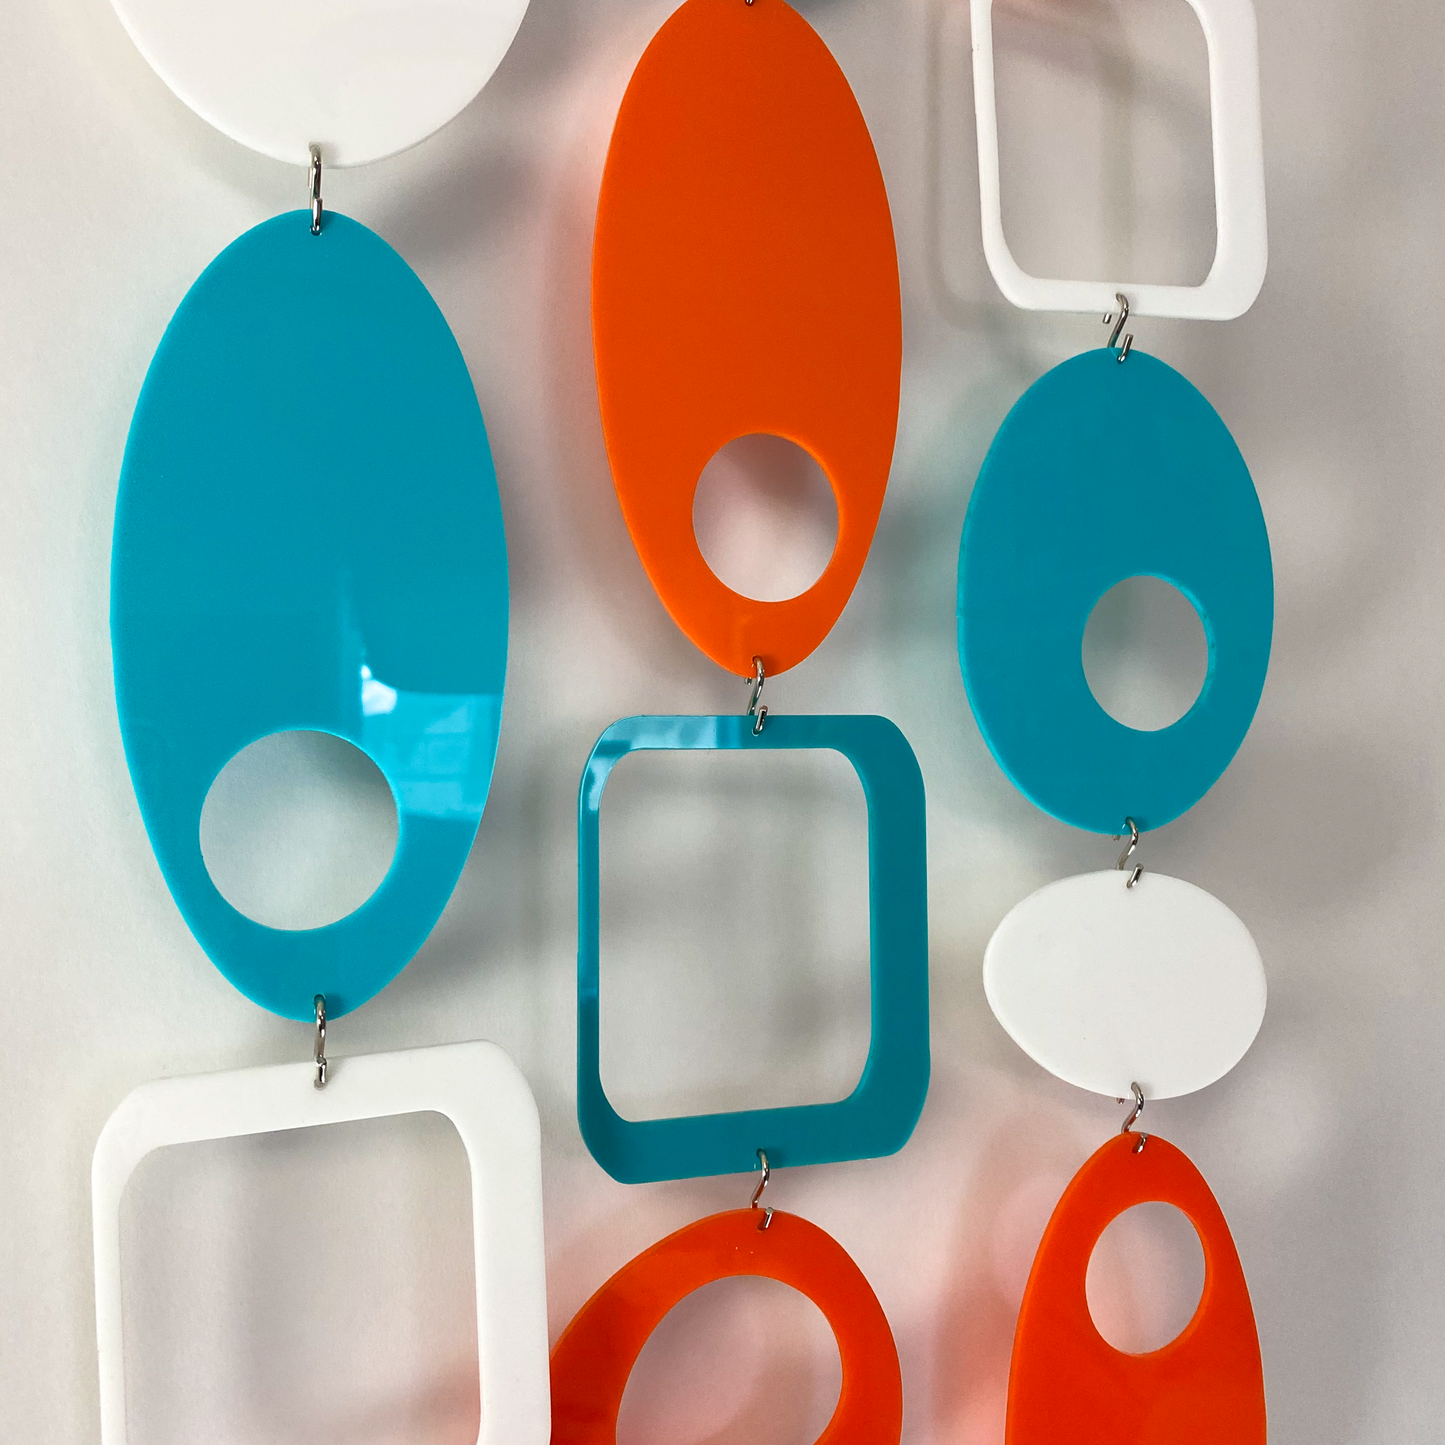 Acrylic Palm Springs Colors of Orange, Aqua, and White - DIY Kit to make room divider, window treatment, wall art, or mobile! by AtomicMobiles.com